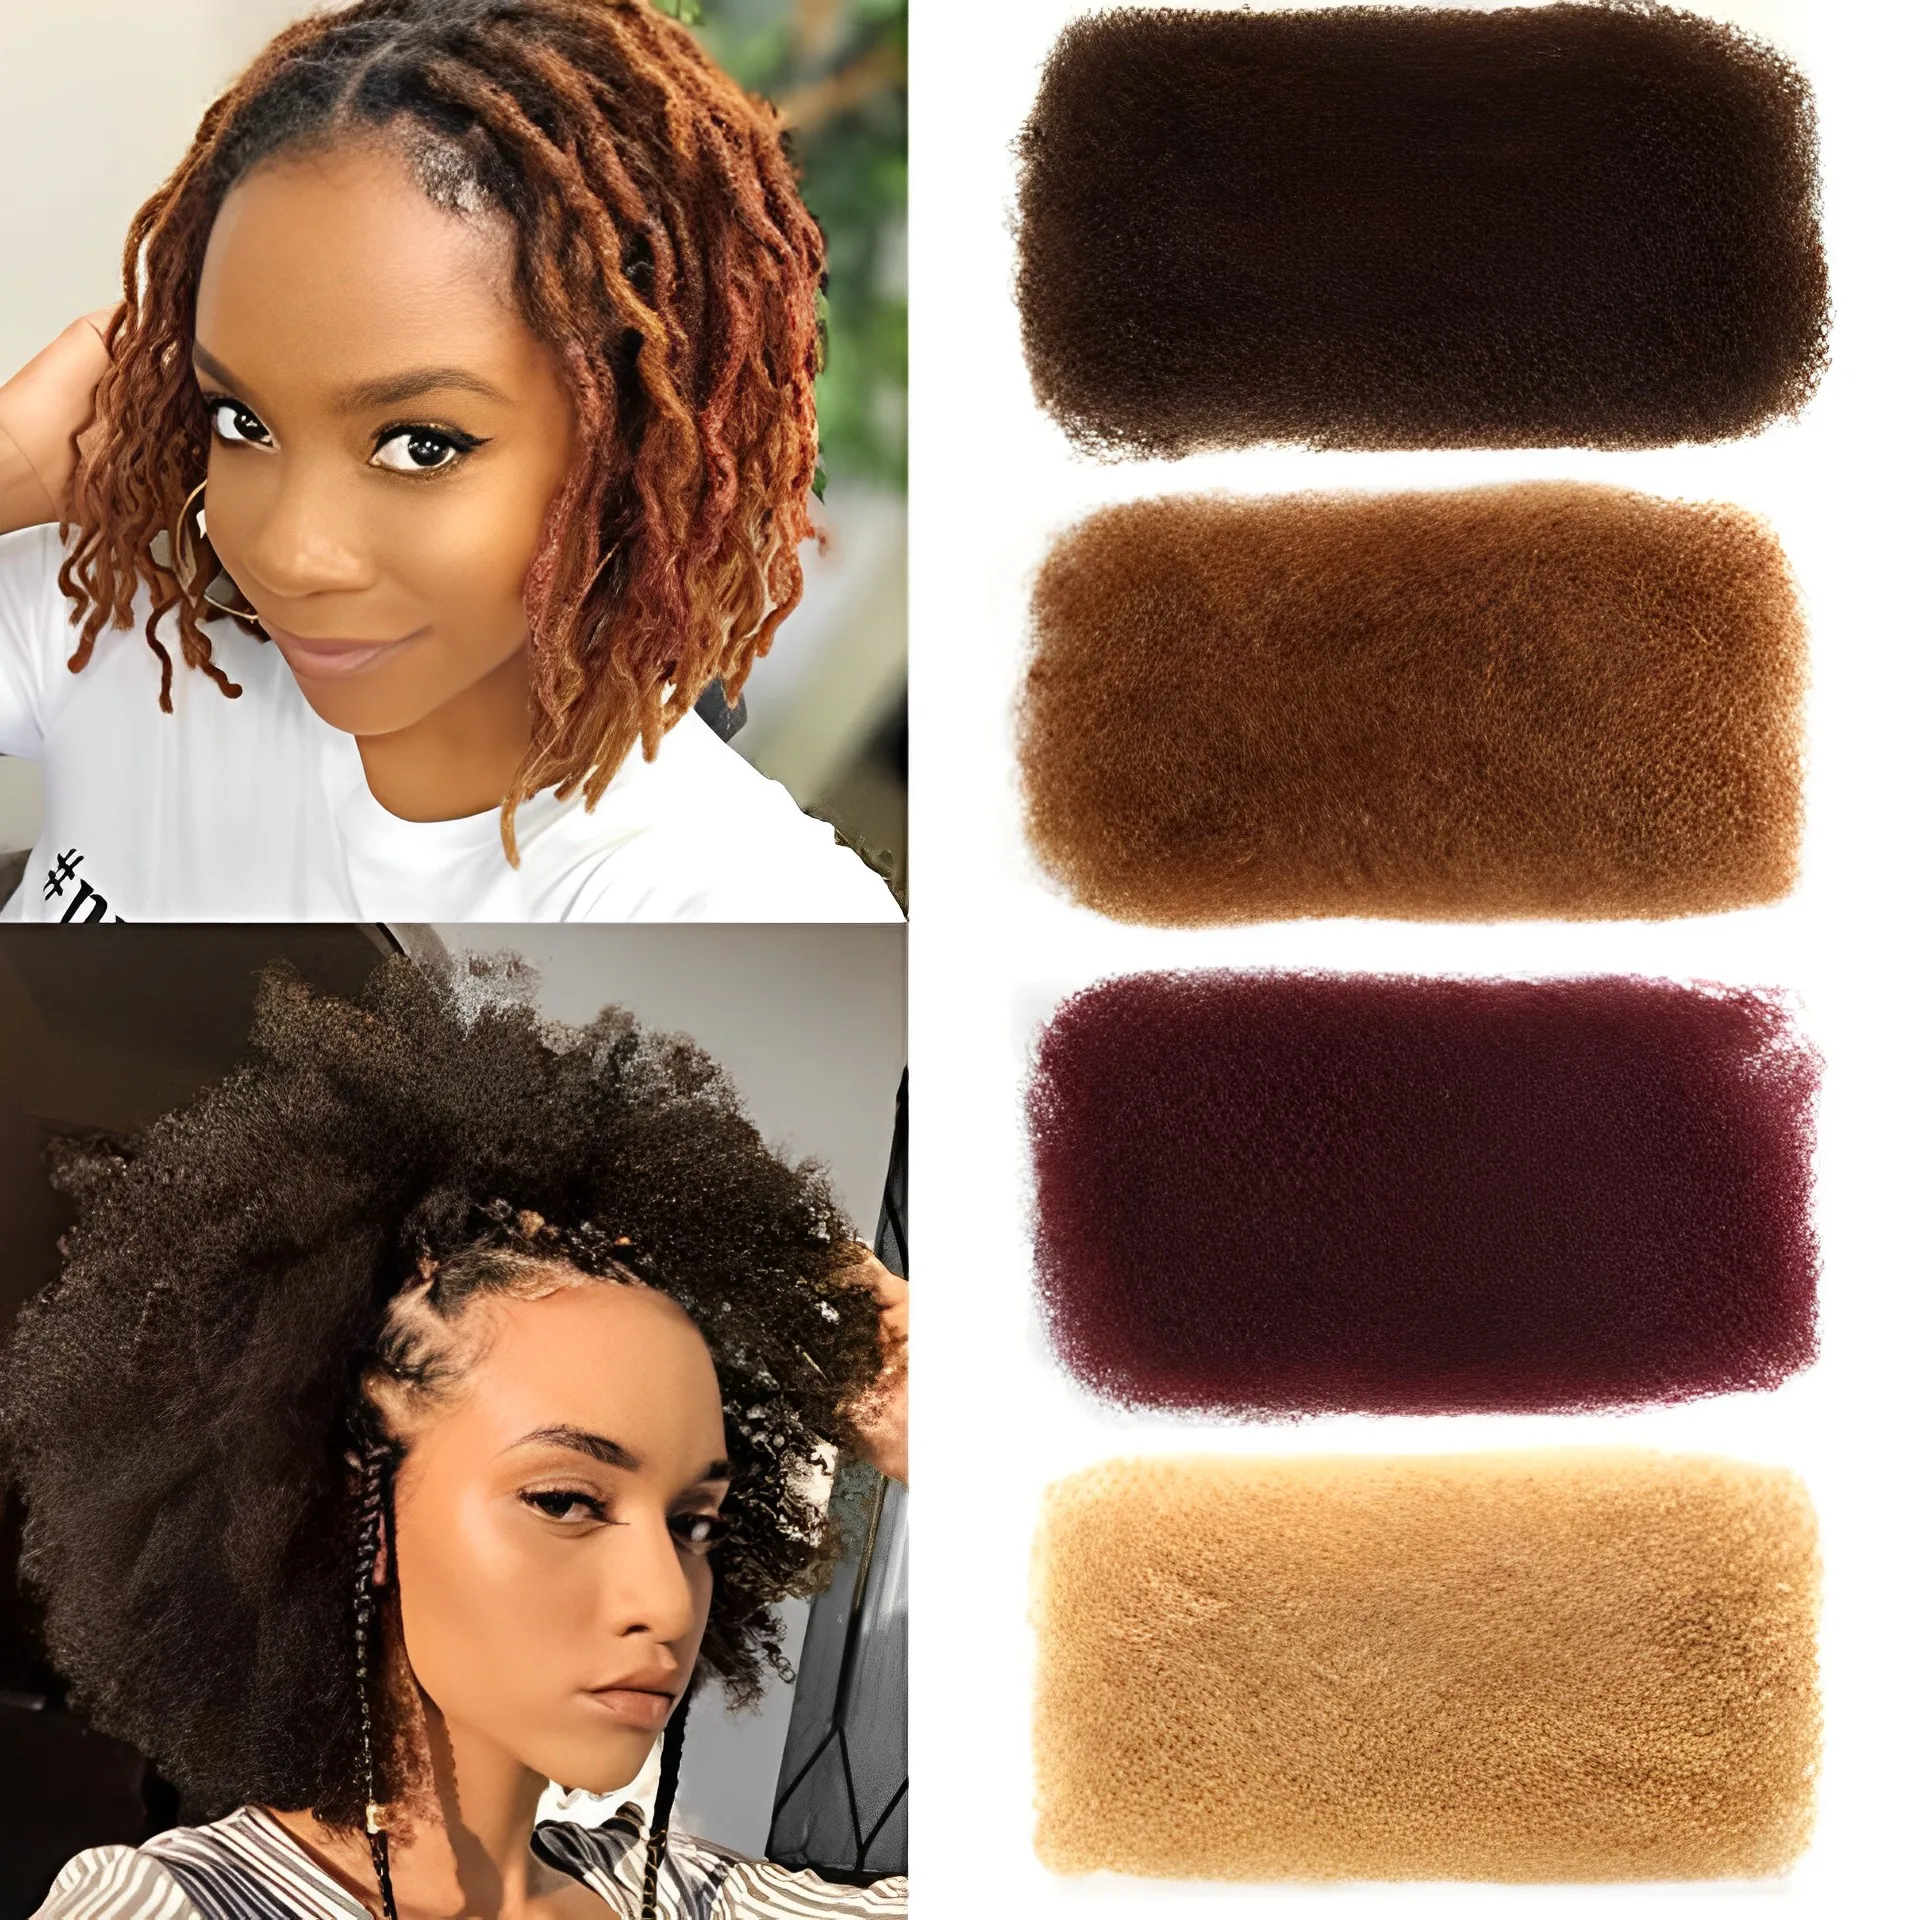 

Rebecca Brazilian Remy Hair Afro kinky Curly Bulk Human Hair For Braiding 1 Bundle 50g/pc Natural Color Braids Hair No Weft